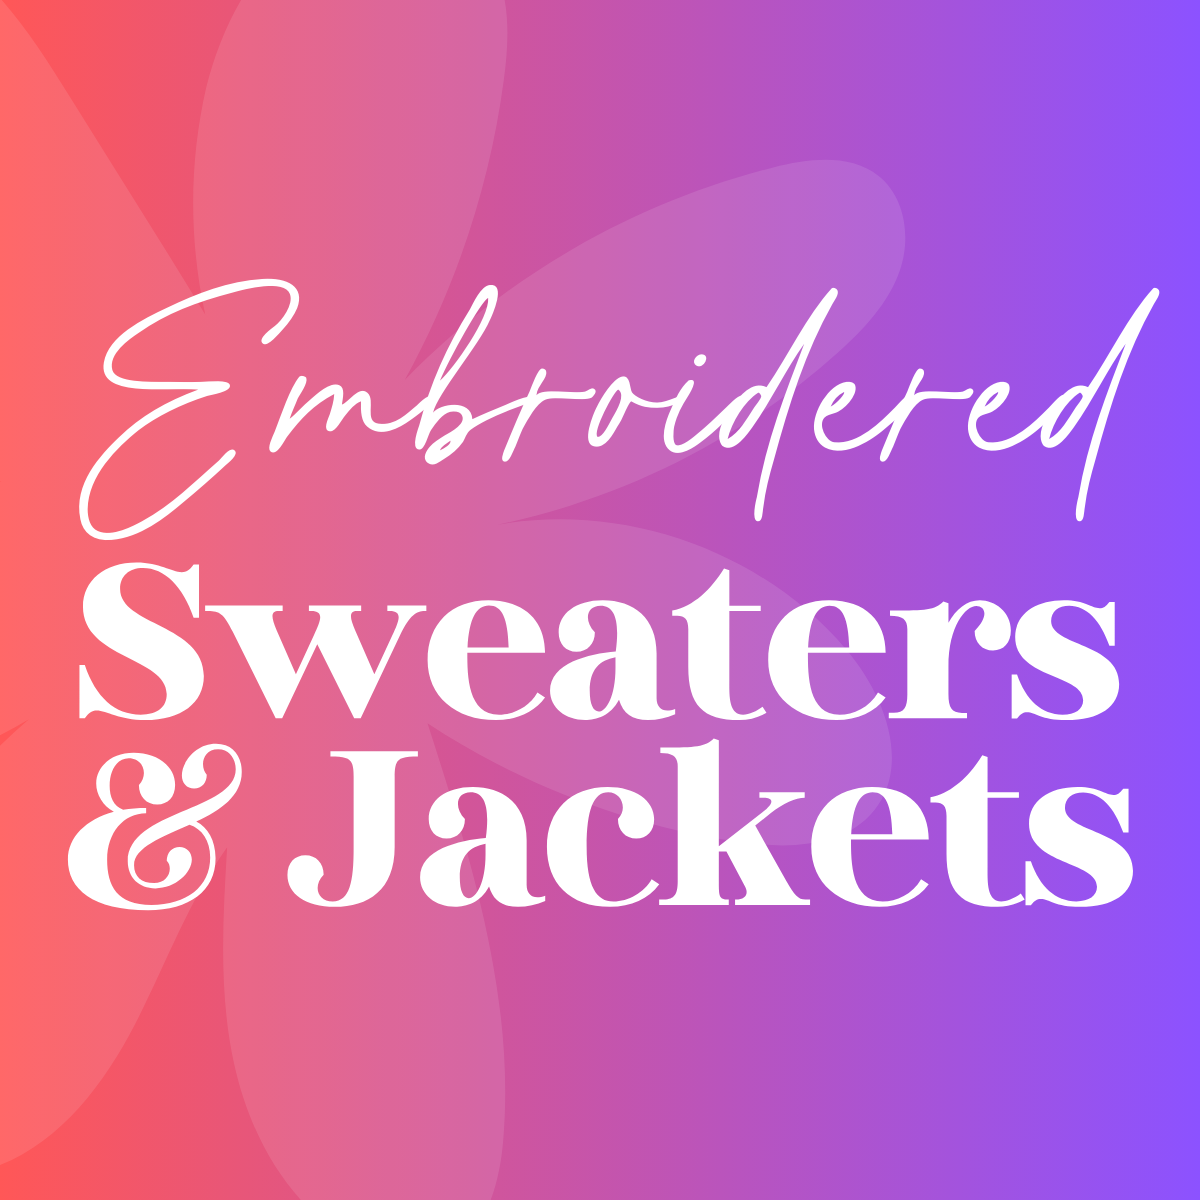 Embroidered Sweaters & Jackets